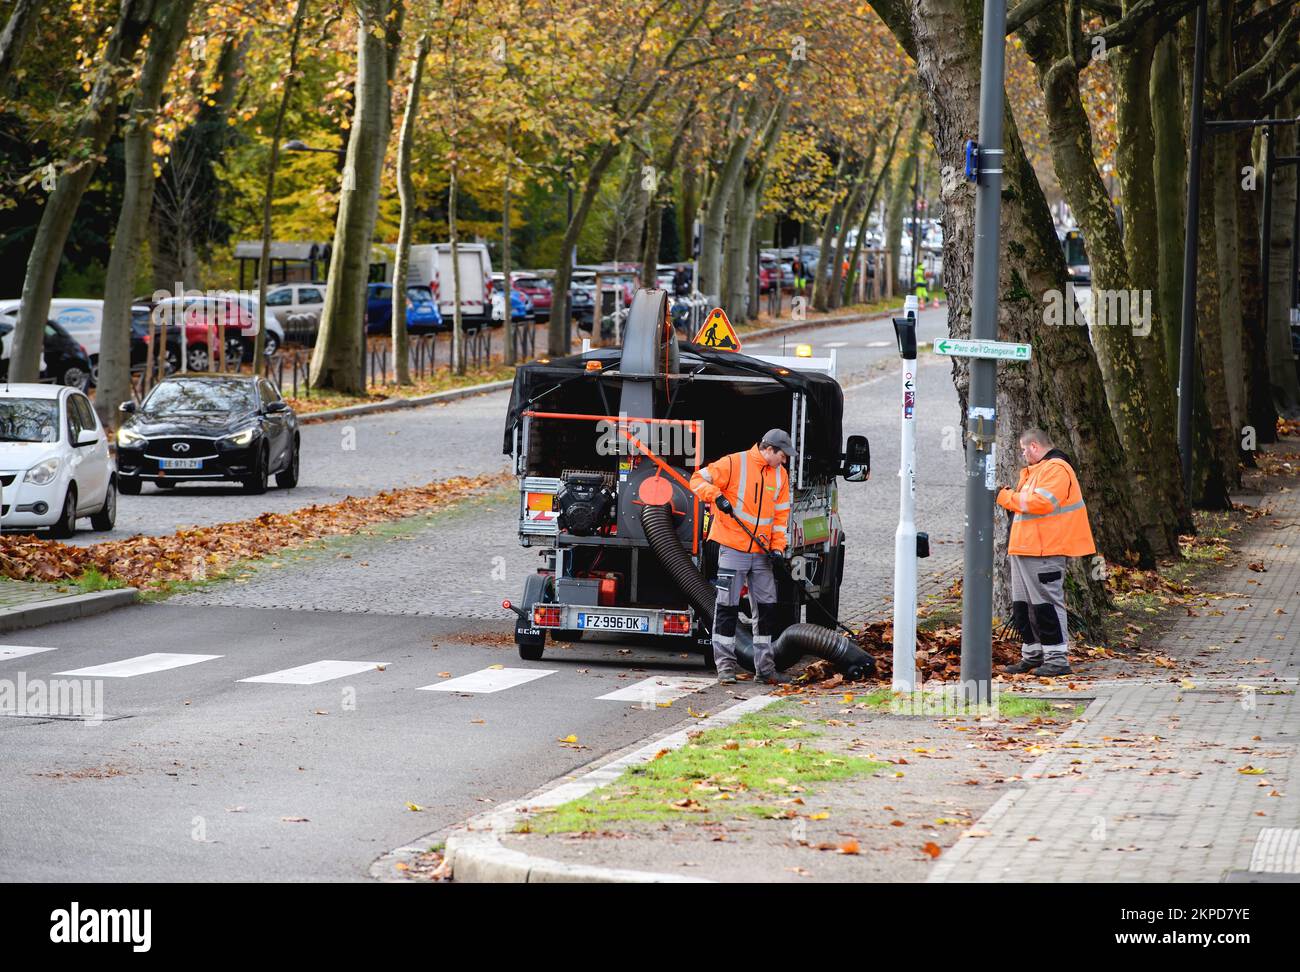 Strasbourg, France - Nov 22, 2022: Workers sweeping footpath during autumn using powerful vacuum cleaner to absorb debris and leaves Stock Photo